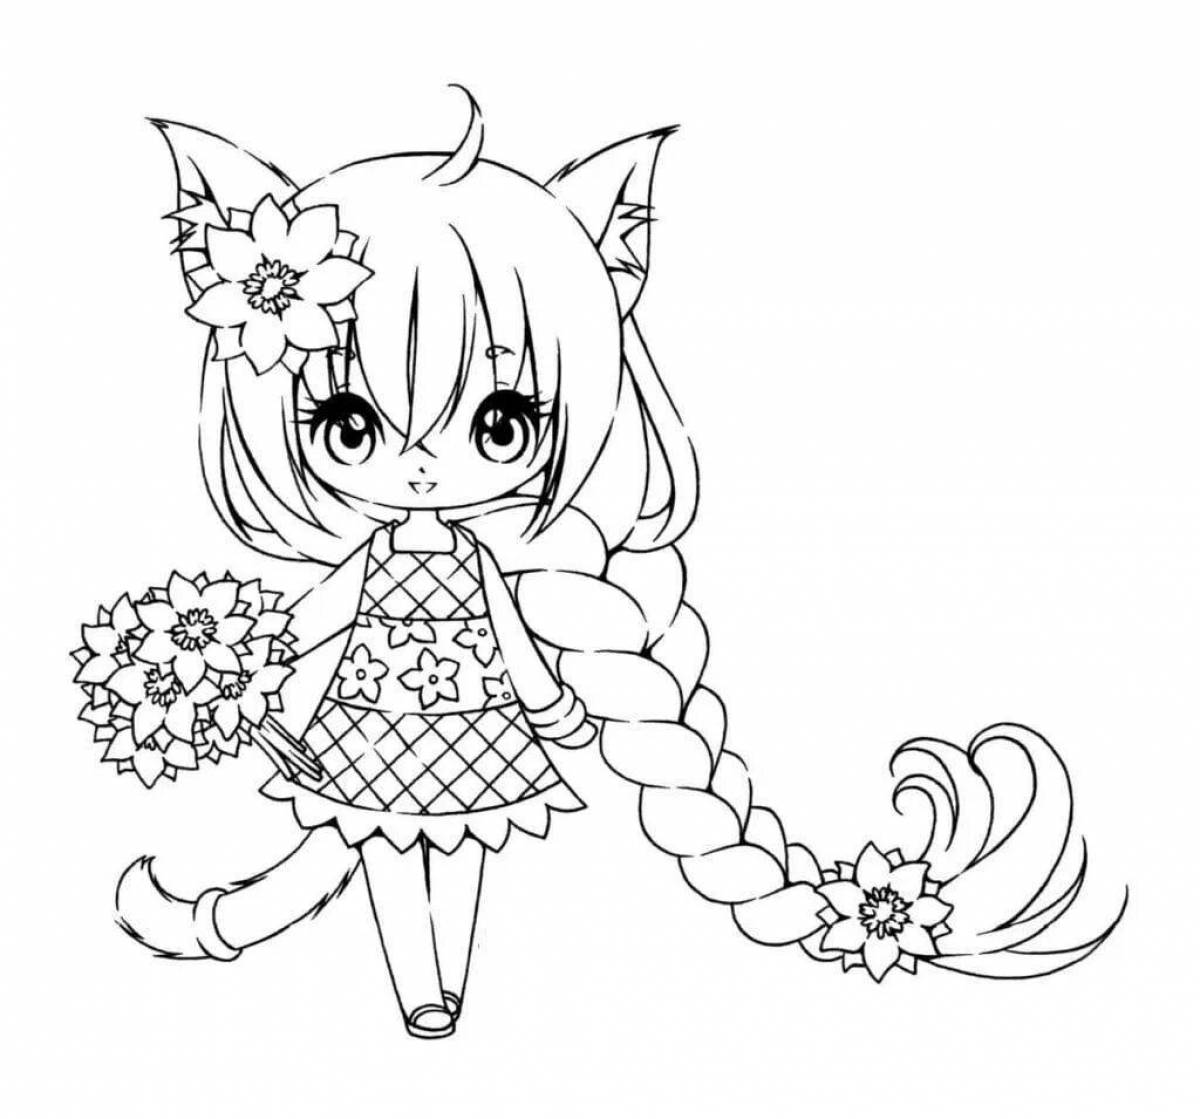 Amazing coloring pages for girls 10 years old anime cute